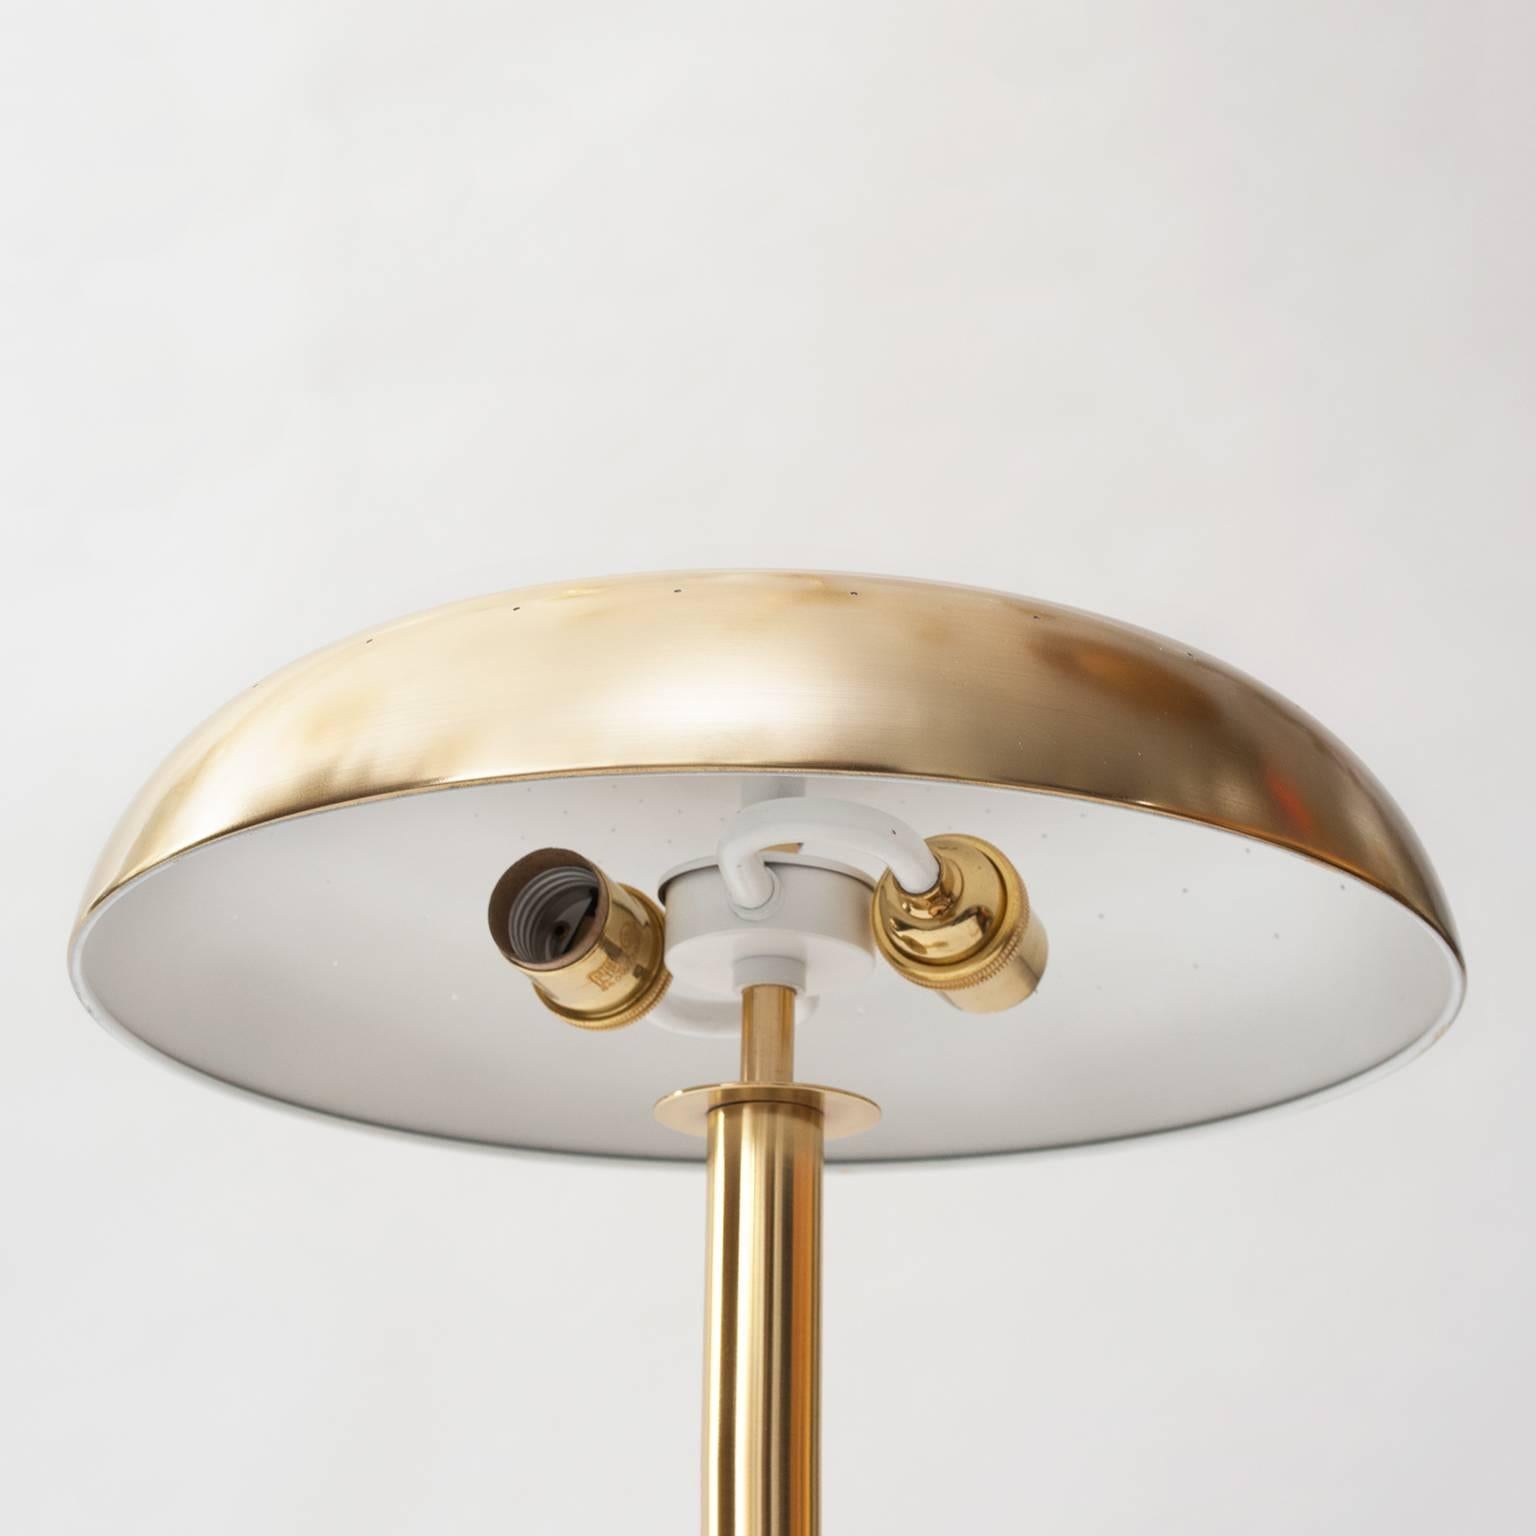 Scandinavian Modern Polished Brass Lamp by Bertil Brisborg for Bohlmarks In Excellent Condition For Sale In New York, NY